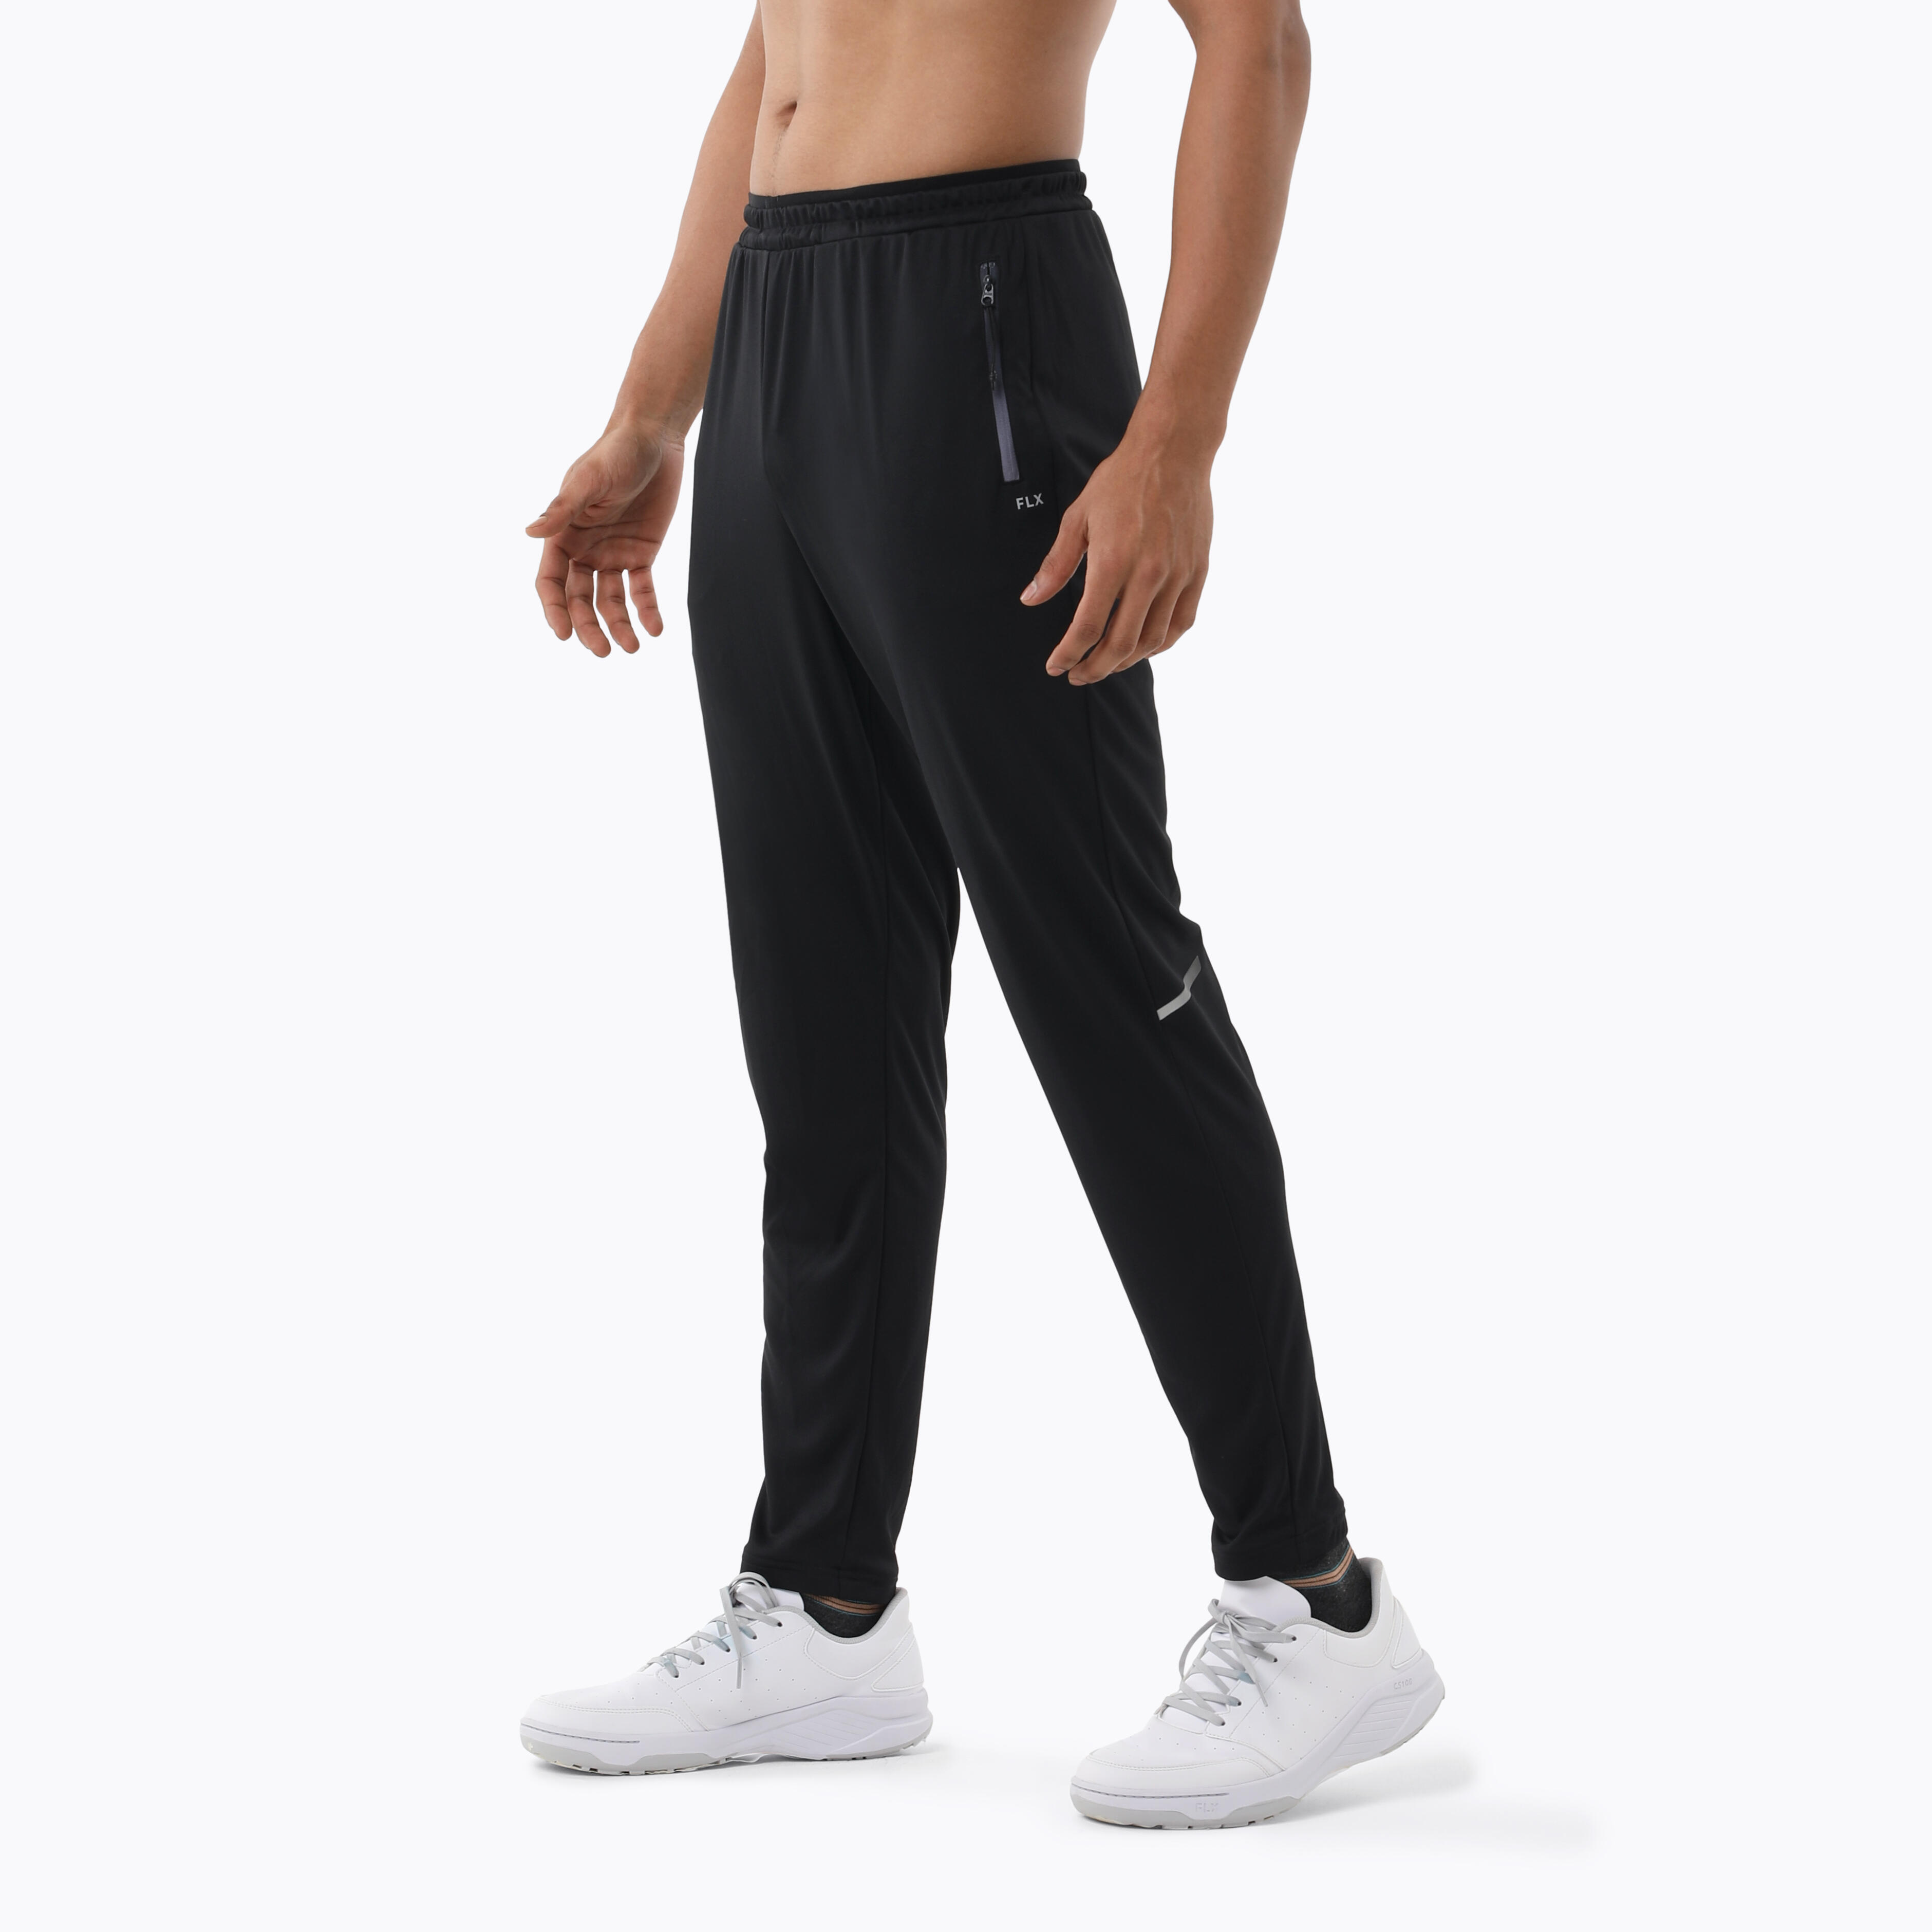 Buy Men White Atmos Cricket Track Pants From Fancode Shop.